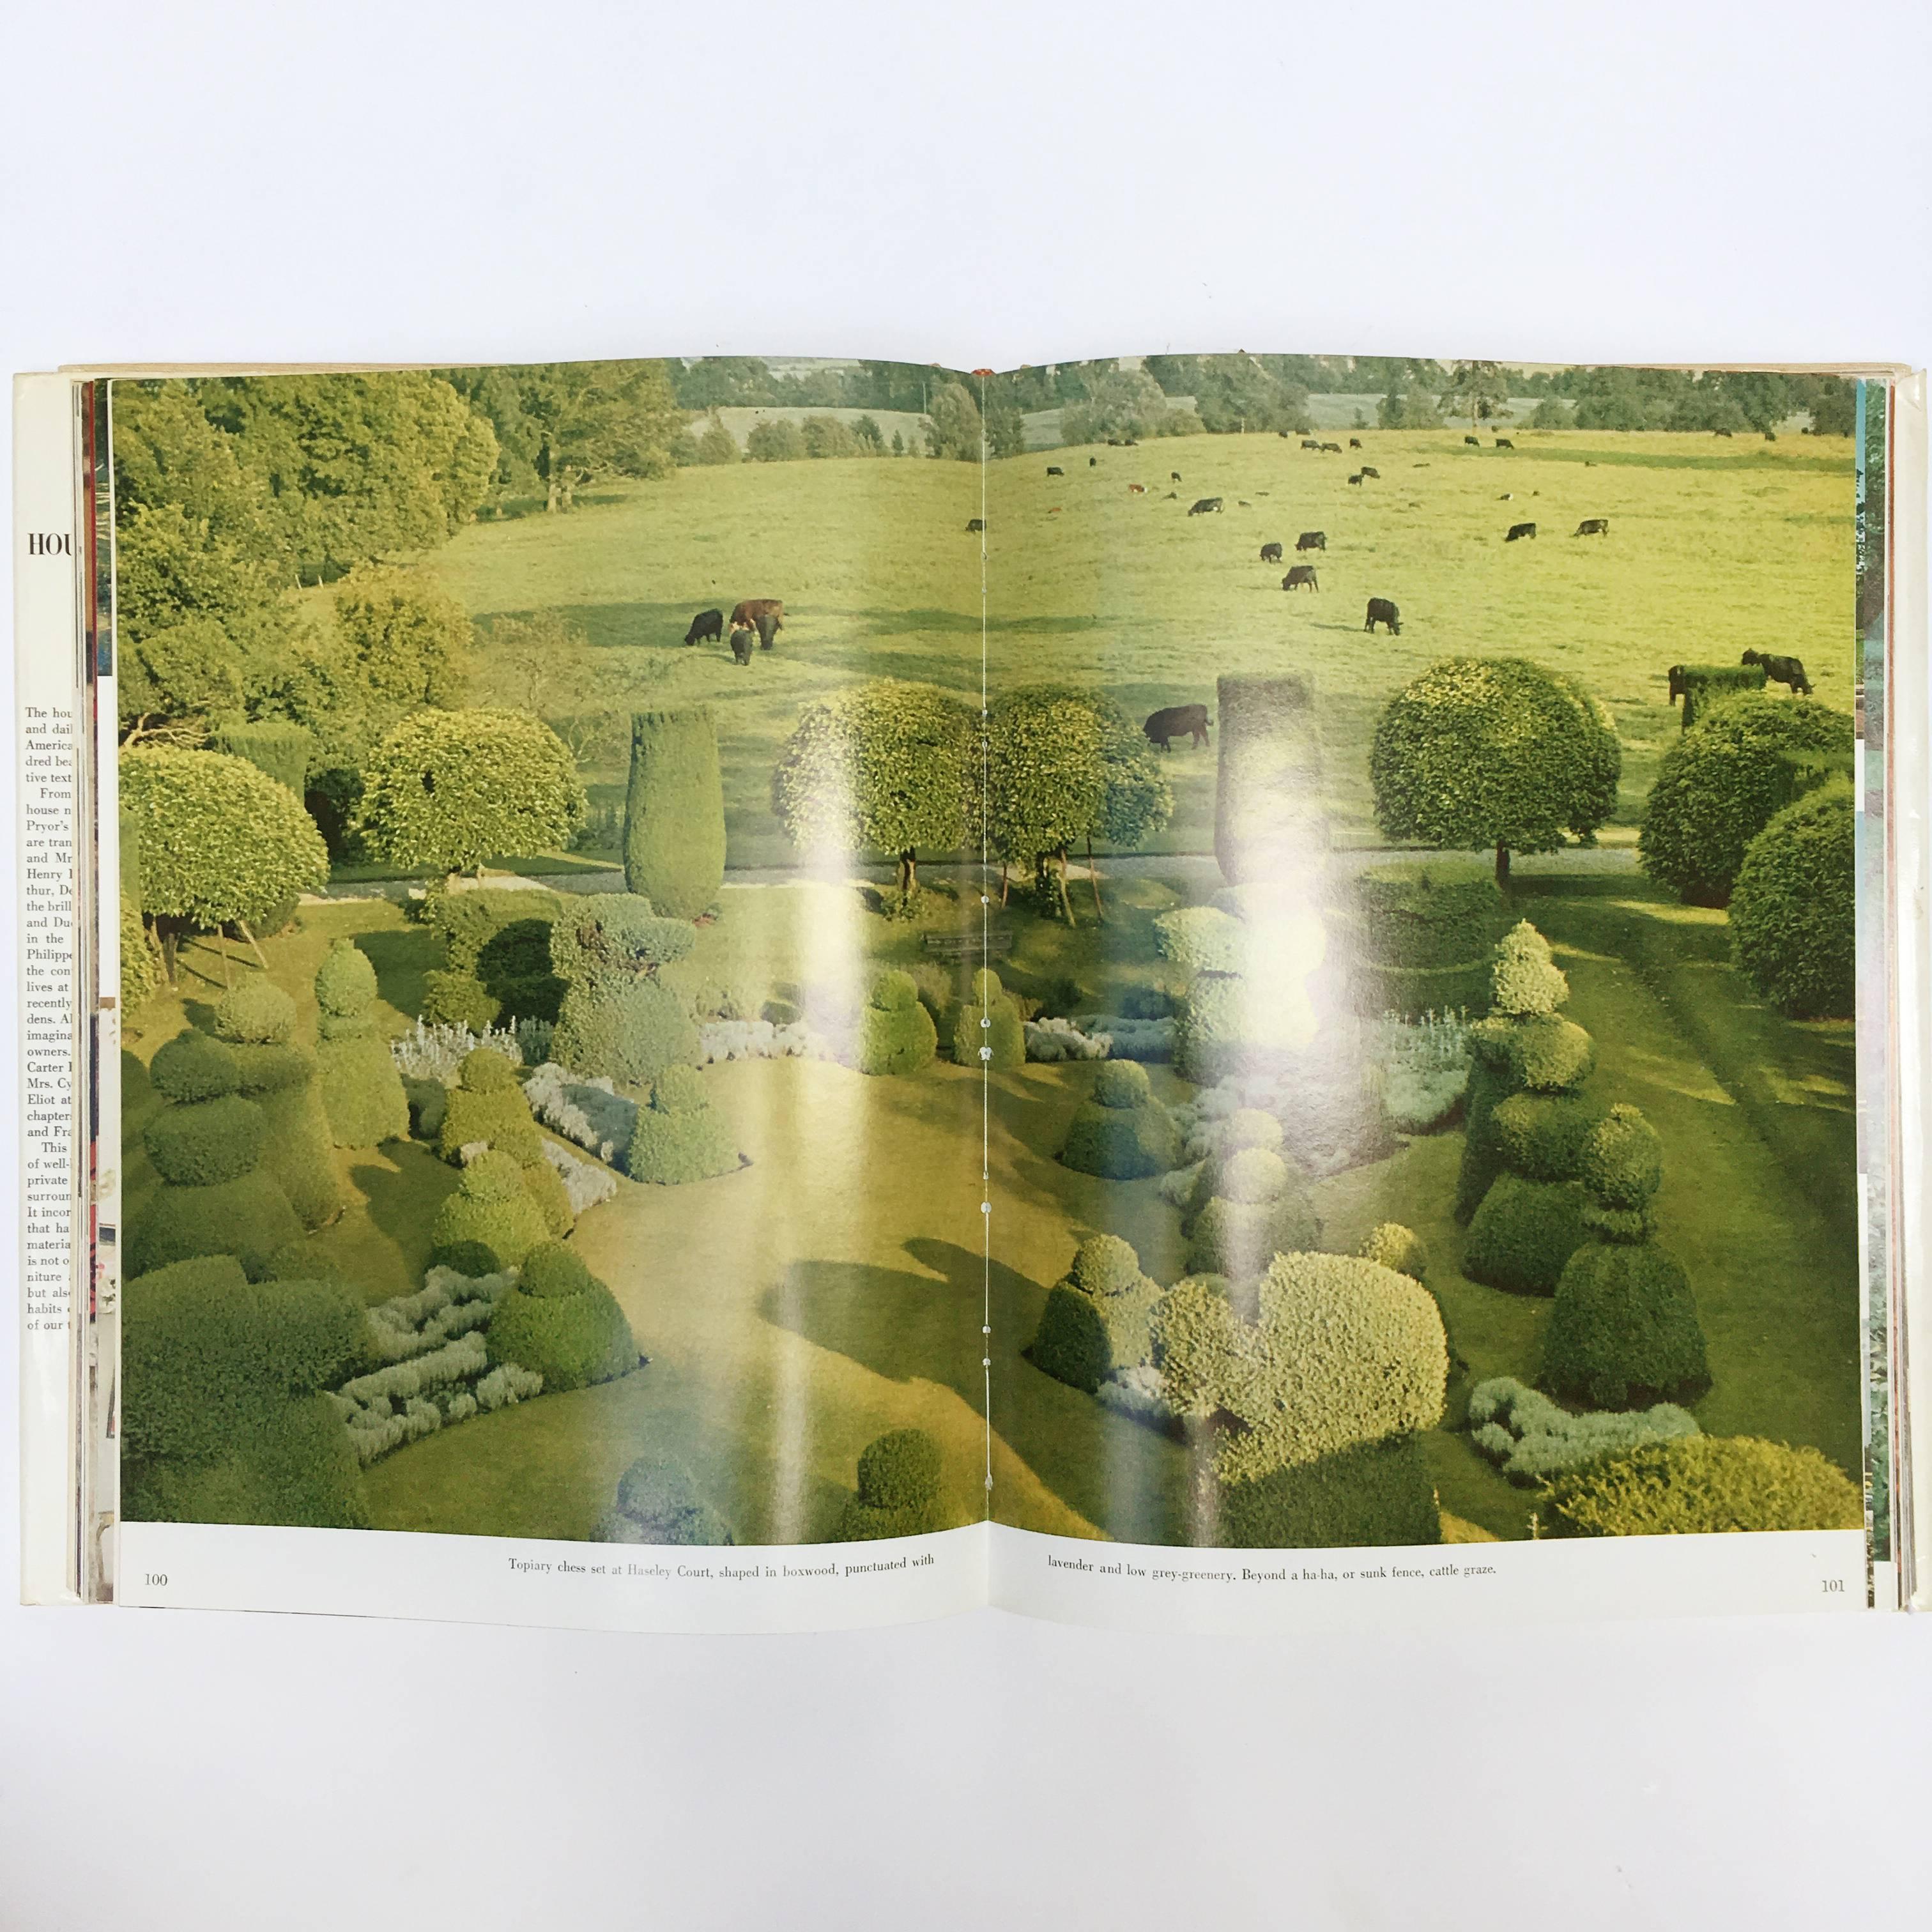 American Vogue's Book of Houses, Gardens, People - Horst, Vreeland, Lawford - 1st, 1968 For Sale